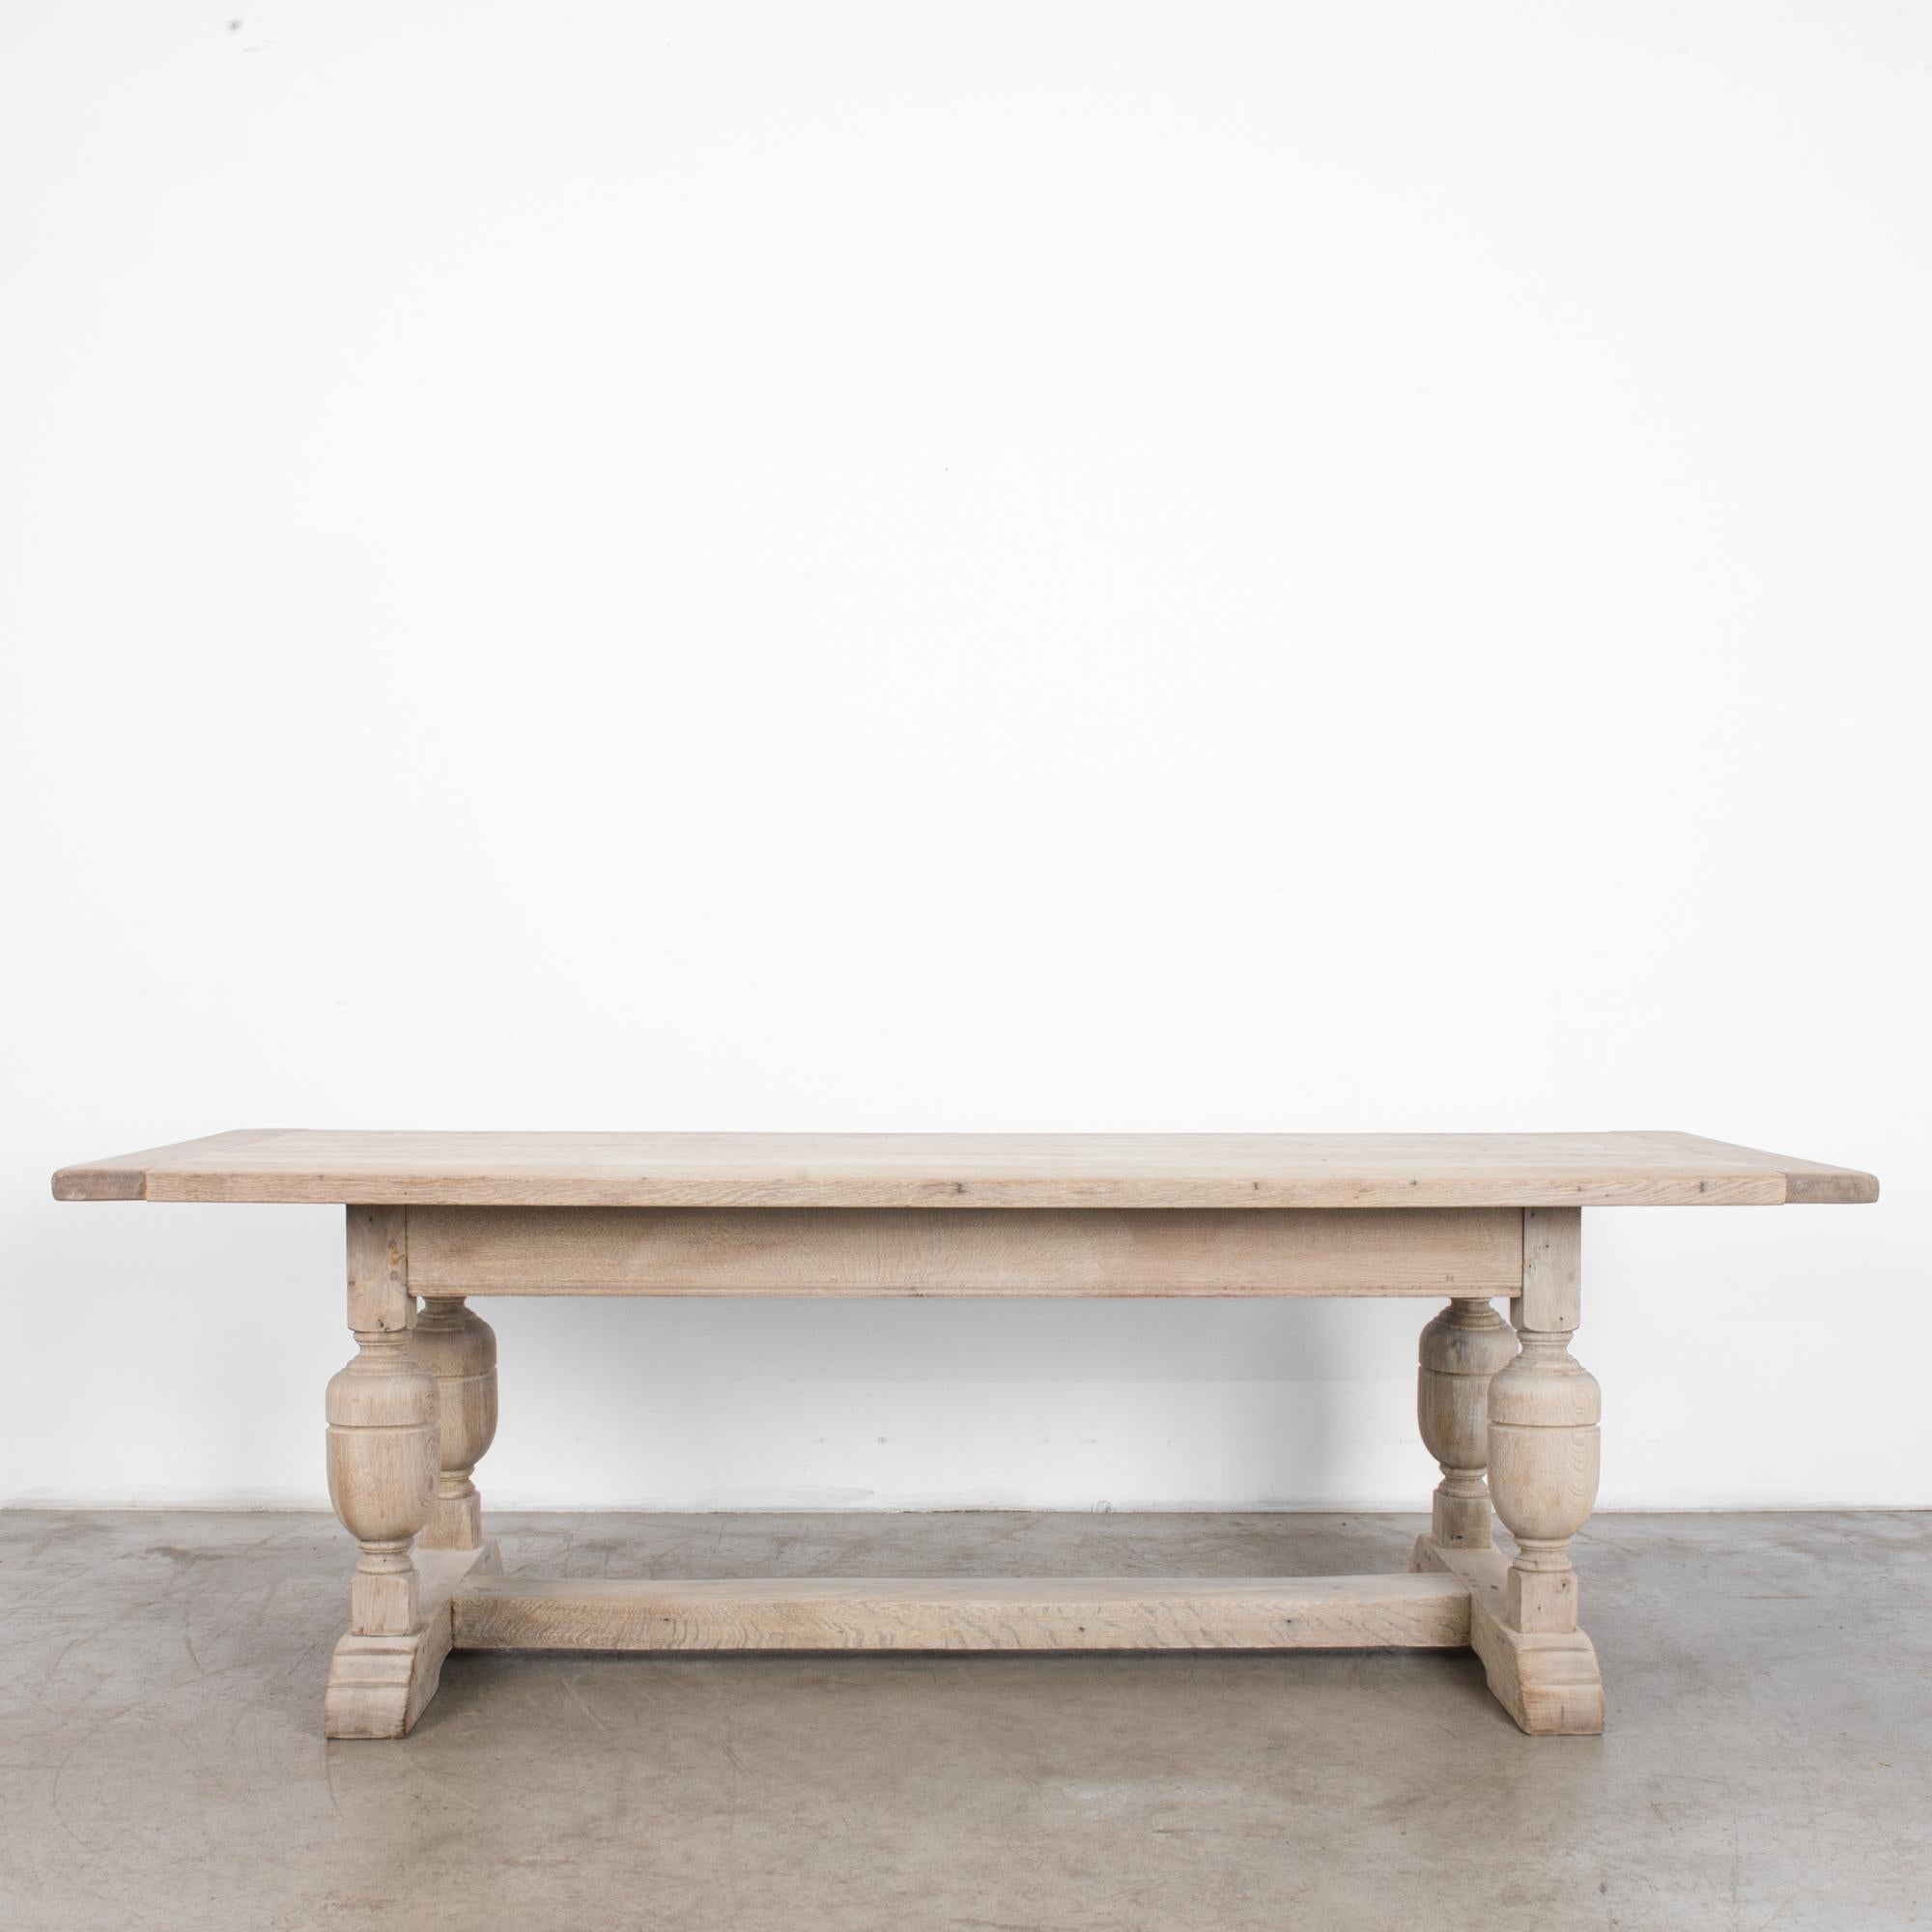 A bleached oak dining table from Belgium, circa 1950. A square tabletop, turned legs and a sturdy central strut create a farmhouse Silhouette. The heft and solidity of this table don’t impede its decorative charm, accentuated by the light finish of